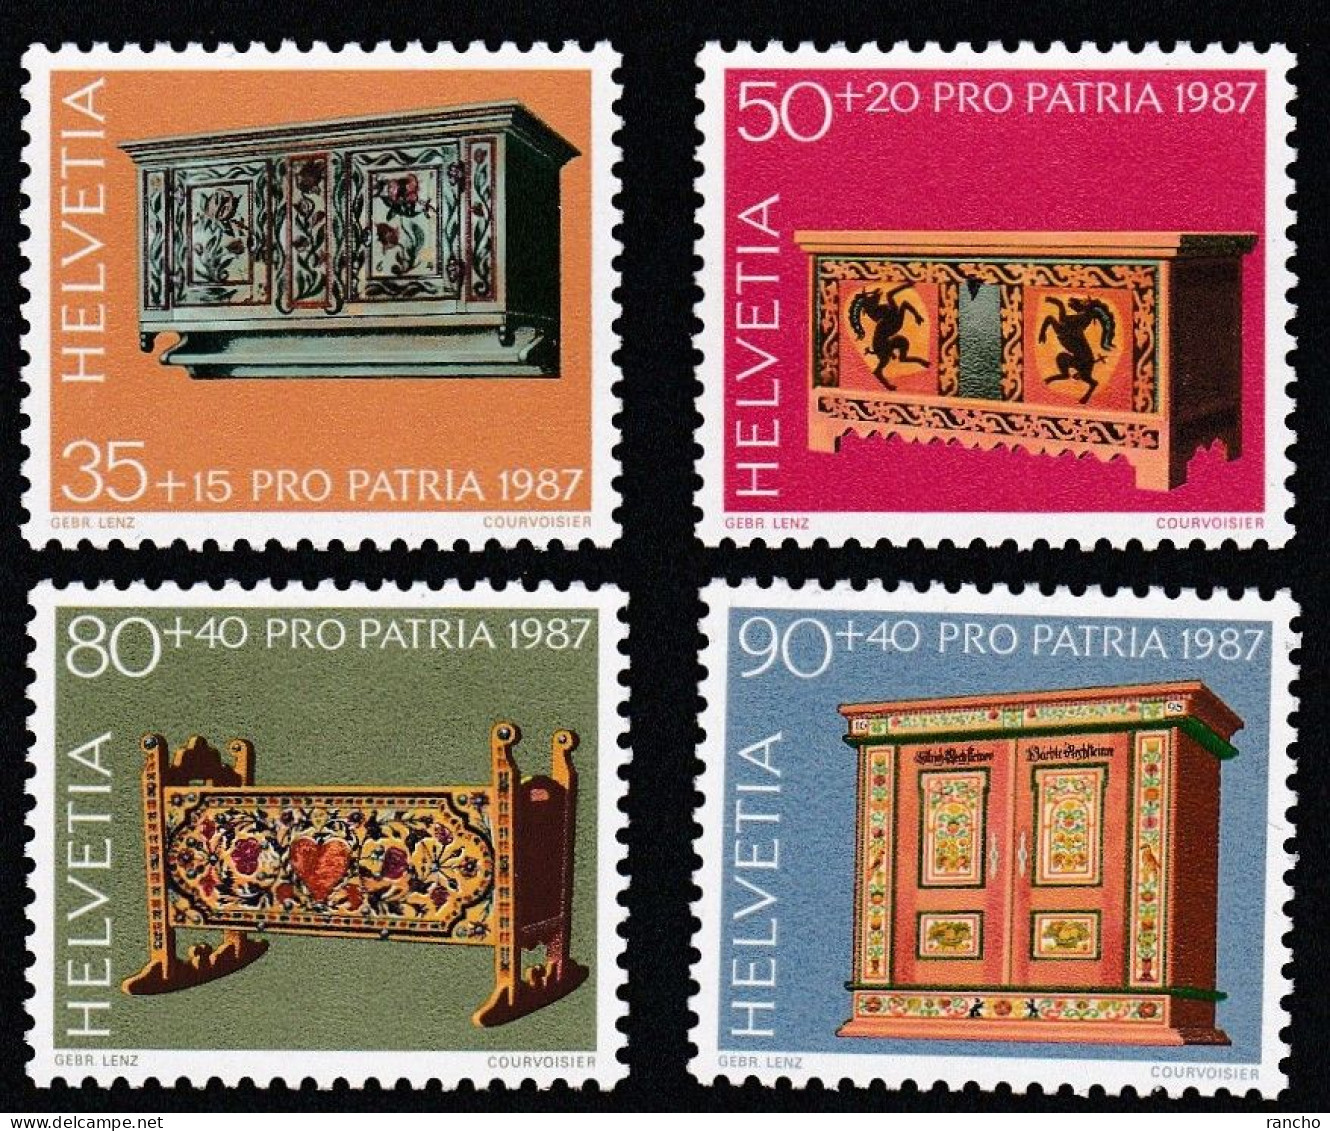 ** PRO/P. 1987. COLLECTION SERIE TIMBRES NEUFS A/GOMME C/.S.B.K. Nr:B215/18. Y&TELLIER Nr:1276/79. MICHEL Nr:1345/48.** - Nuovi